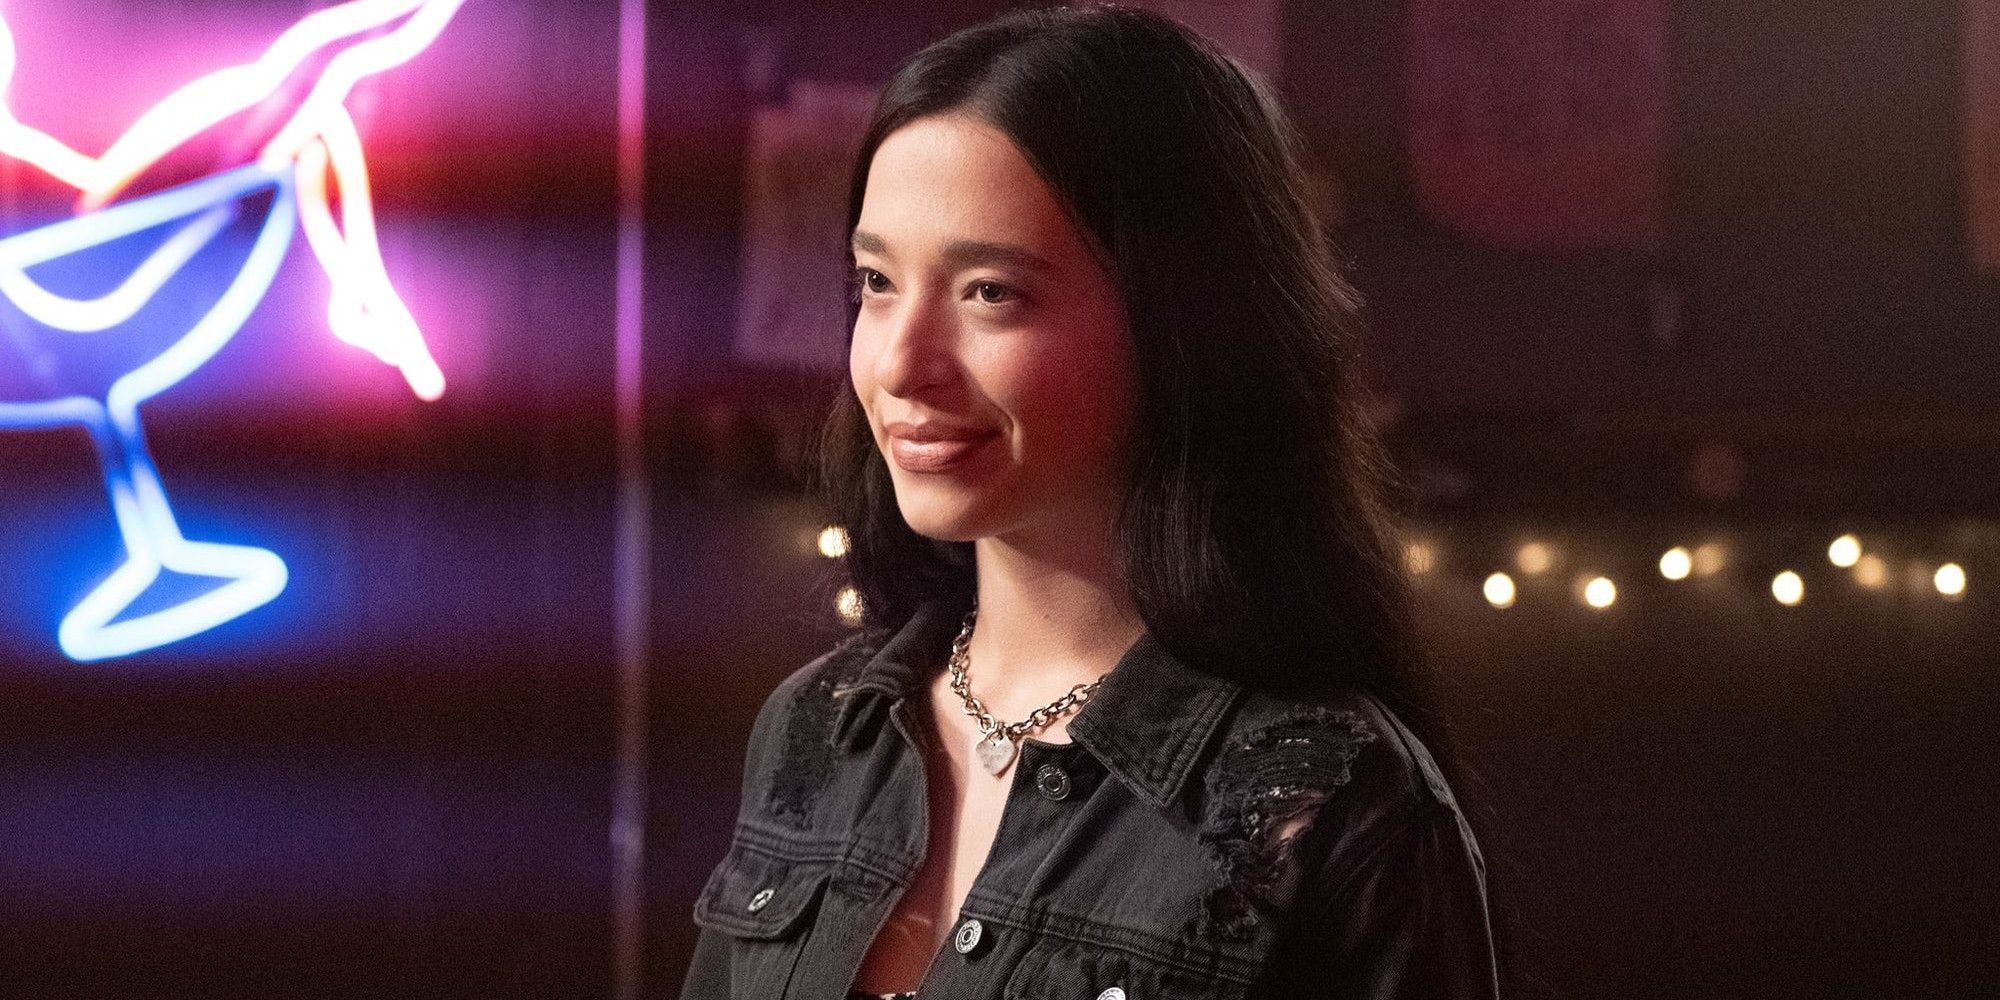 Amber smiles at a bar in Scream (2022).